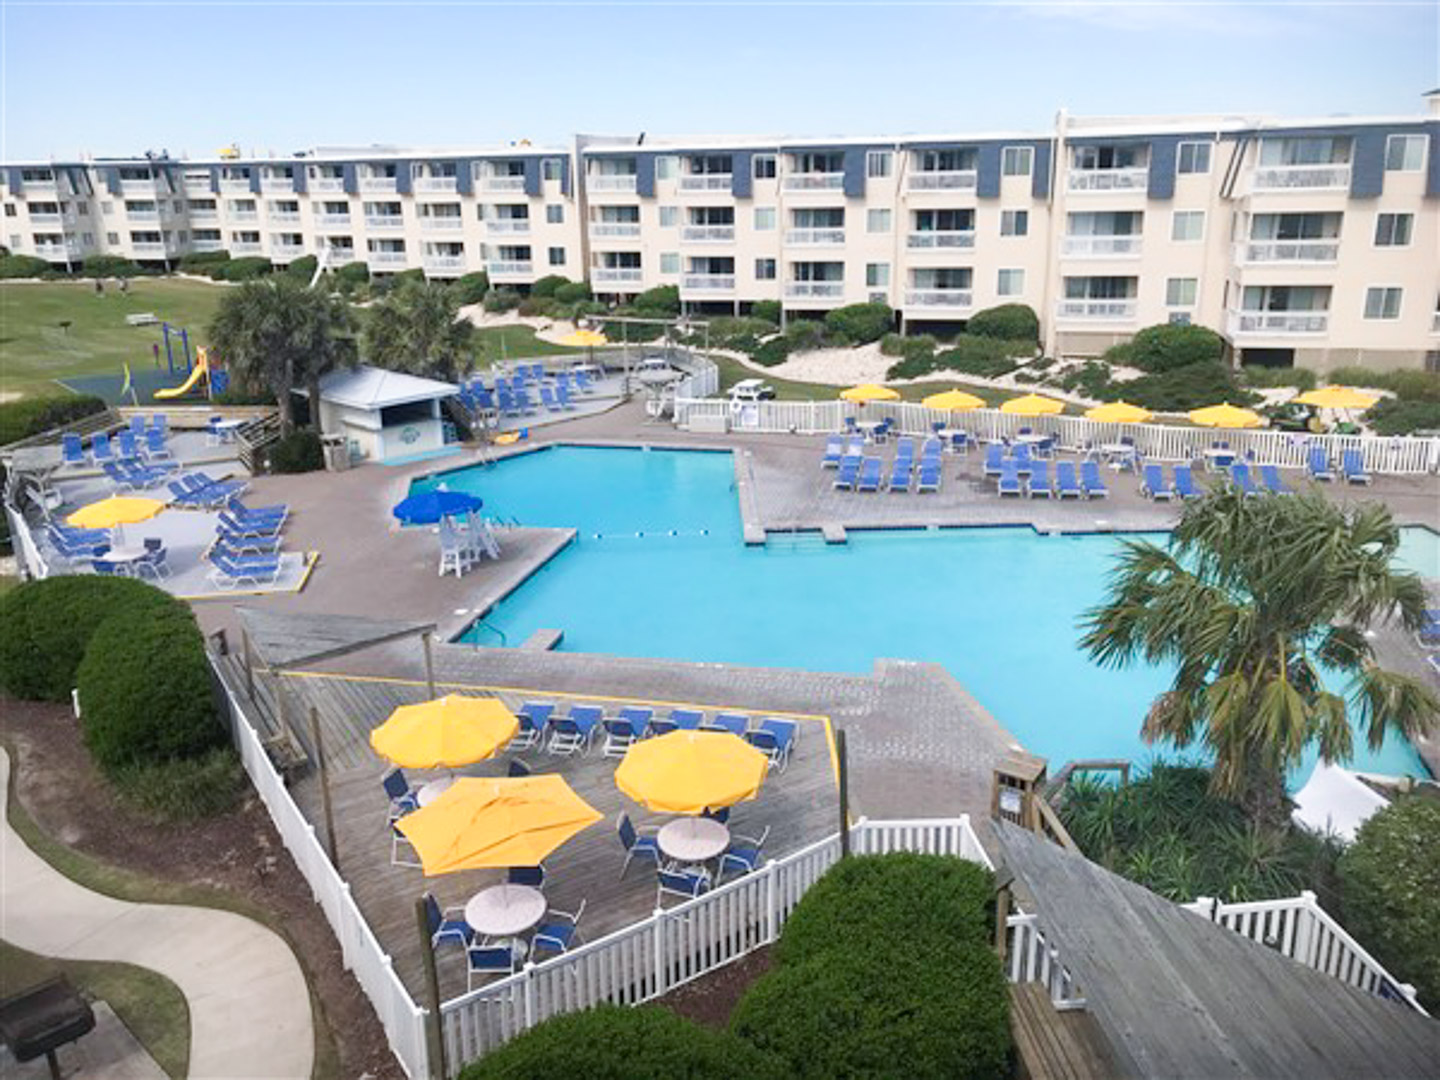 A spacious outdoor swimming pool at VRI's A Place at the Beach in Atlantic Beach, NC.